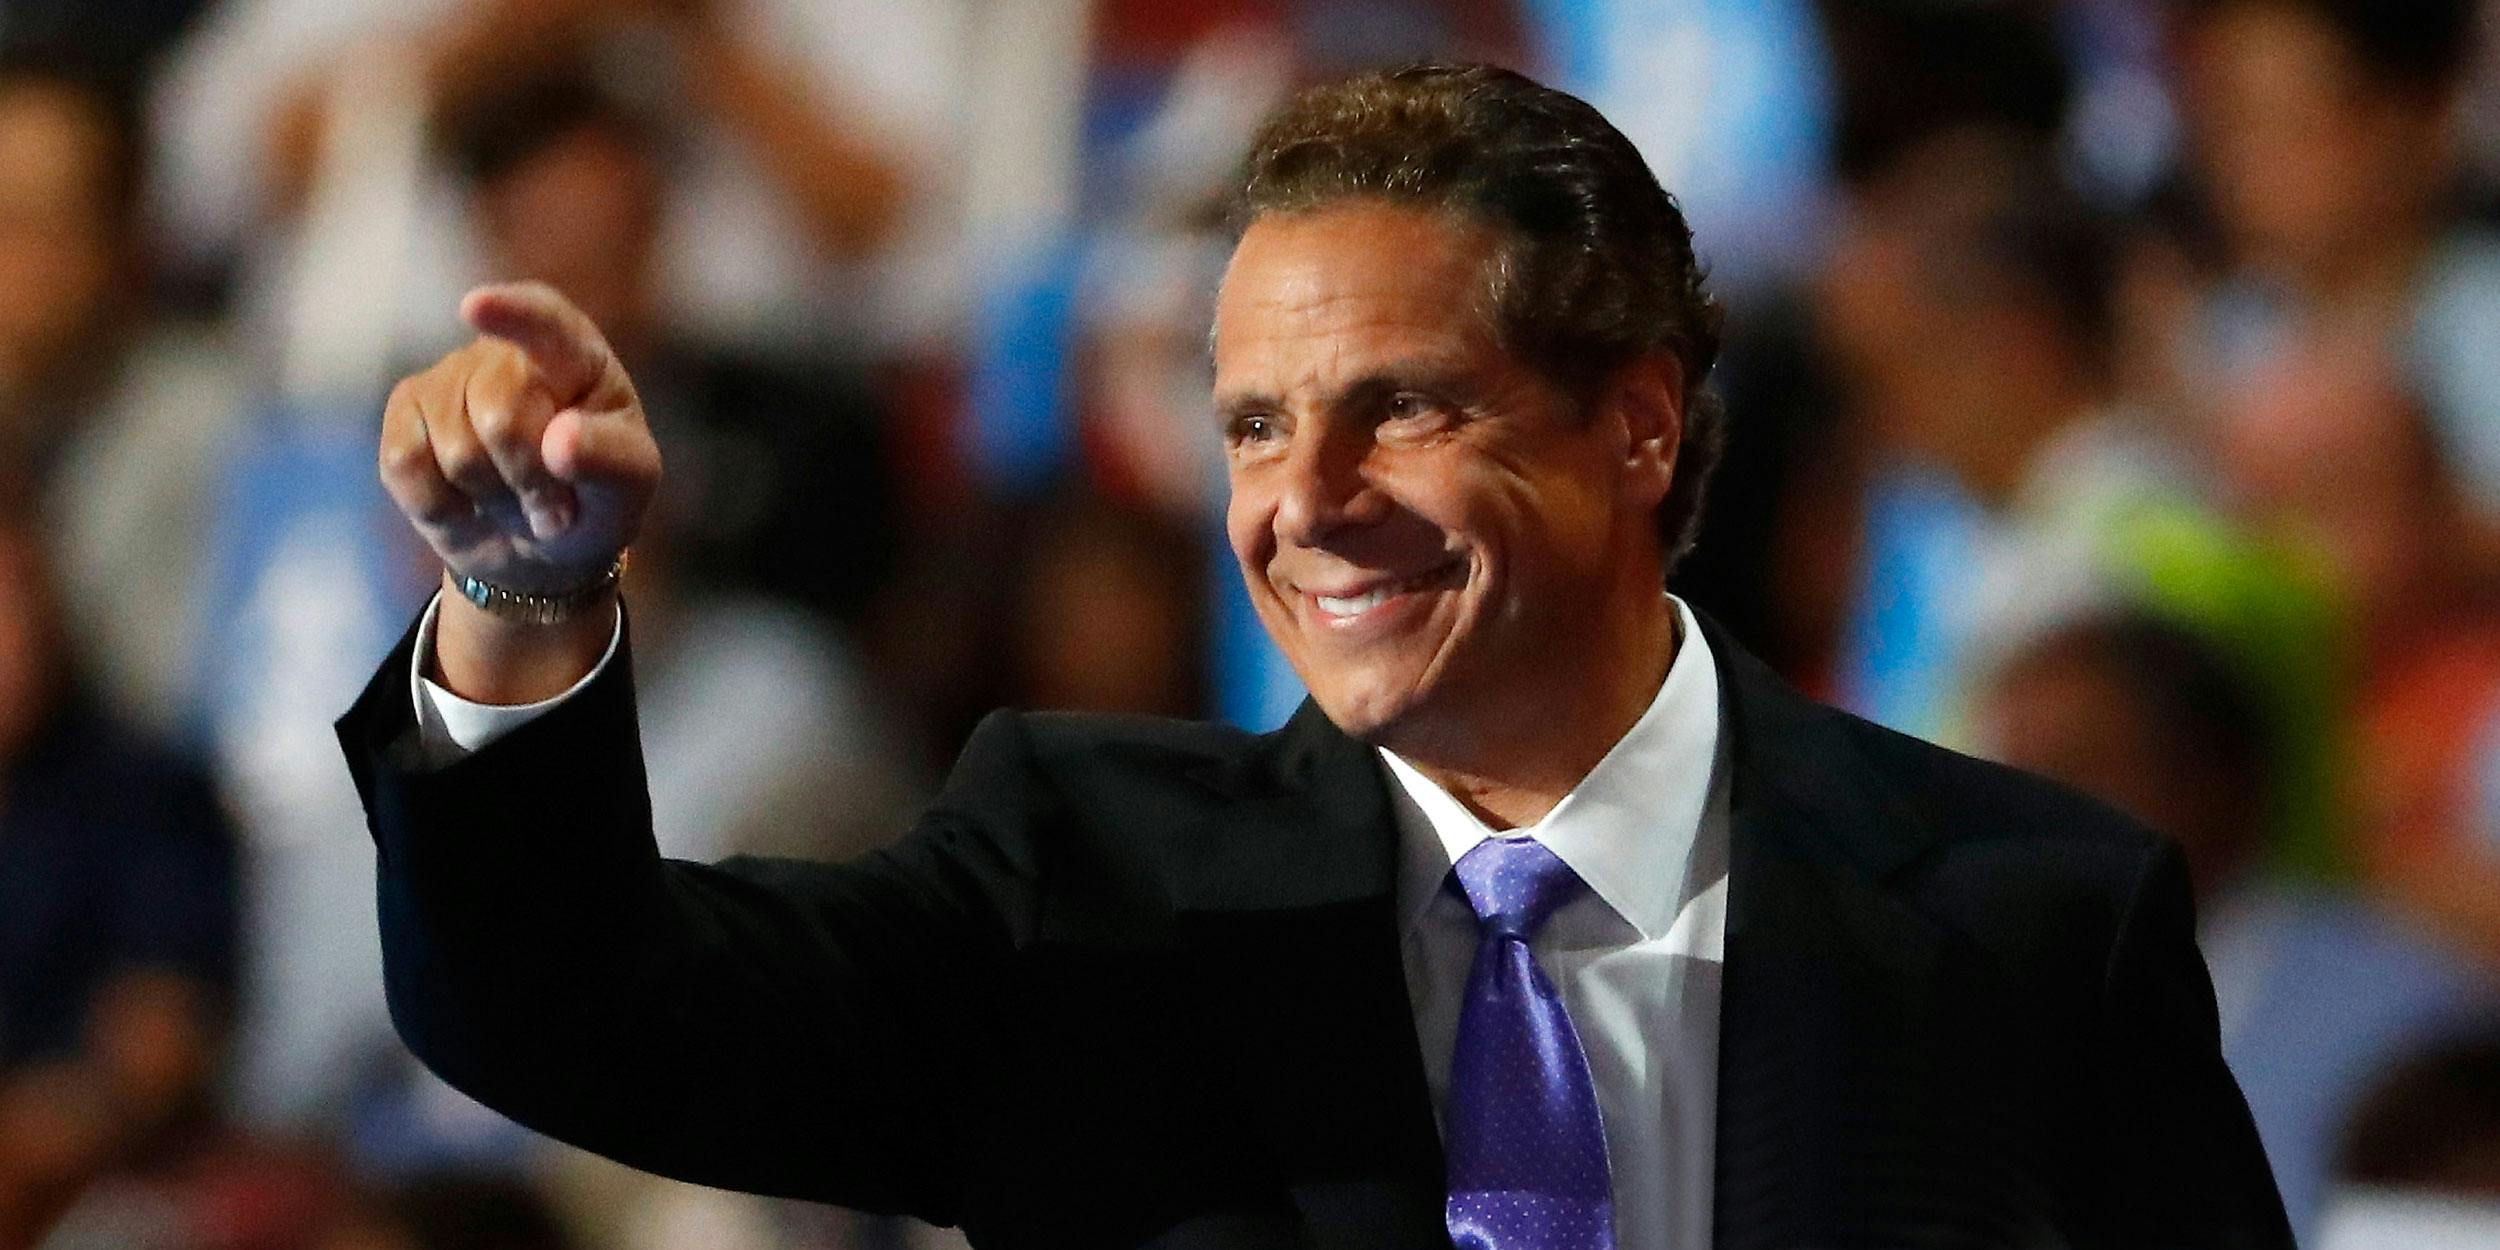 PHILADELPHIA, PA - JULY 28: New York Governor Andrew Cuomo (D-NY) gestures to the crowd as he arrives on stage to deliver remarks on the fourth day of the Democratic National Convention at the Wells Fargo Center, July 28, 2016 in Philadelphia, Pennsylvania. (Photo by Aaron P. Bernstein/Getty Images)